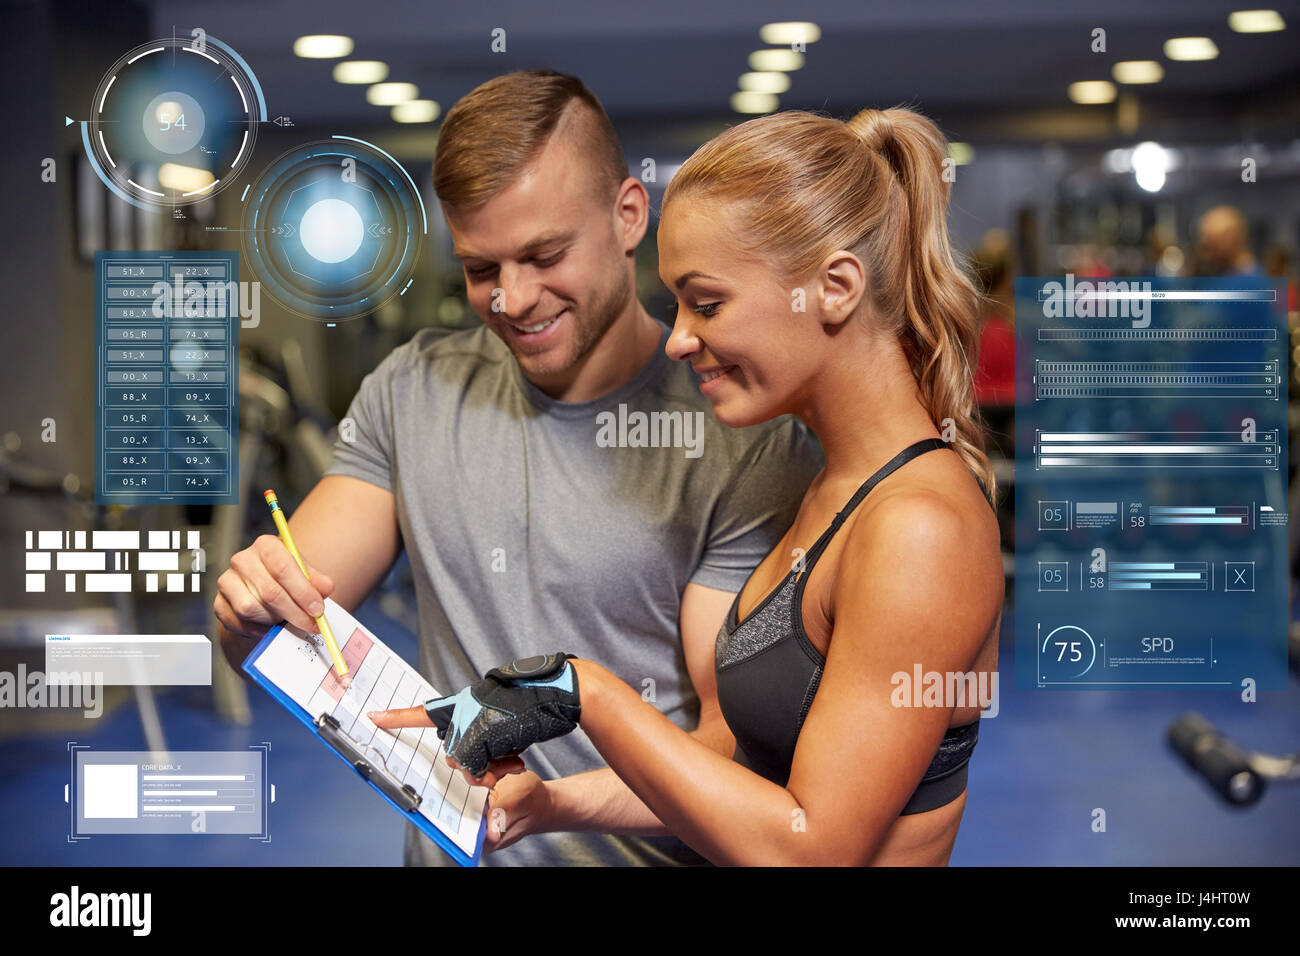 smiling woman with trainer and clipboard in gym Stock Photo